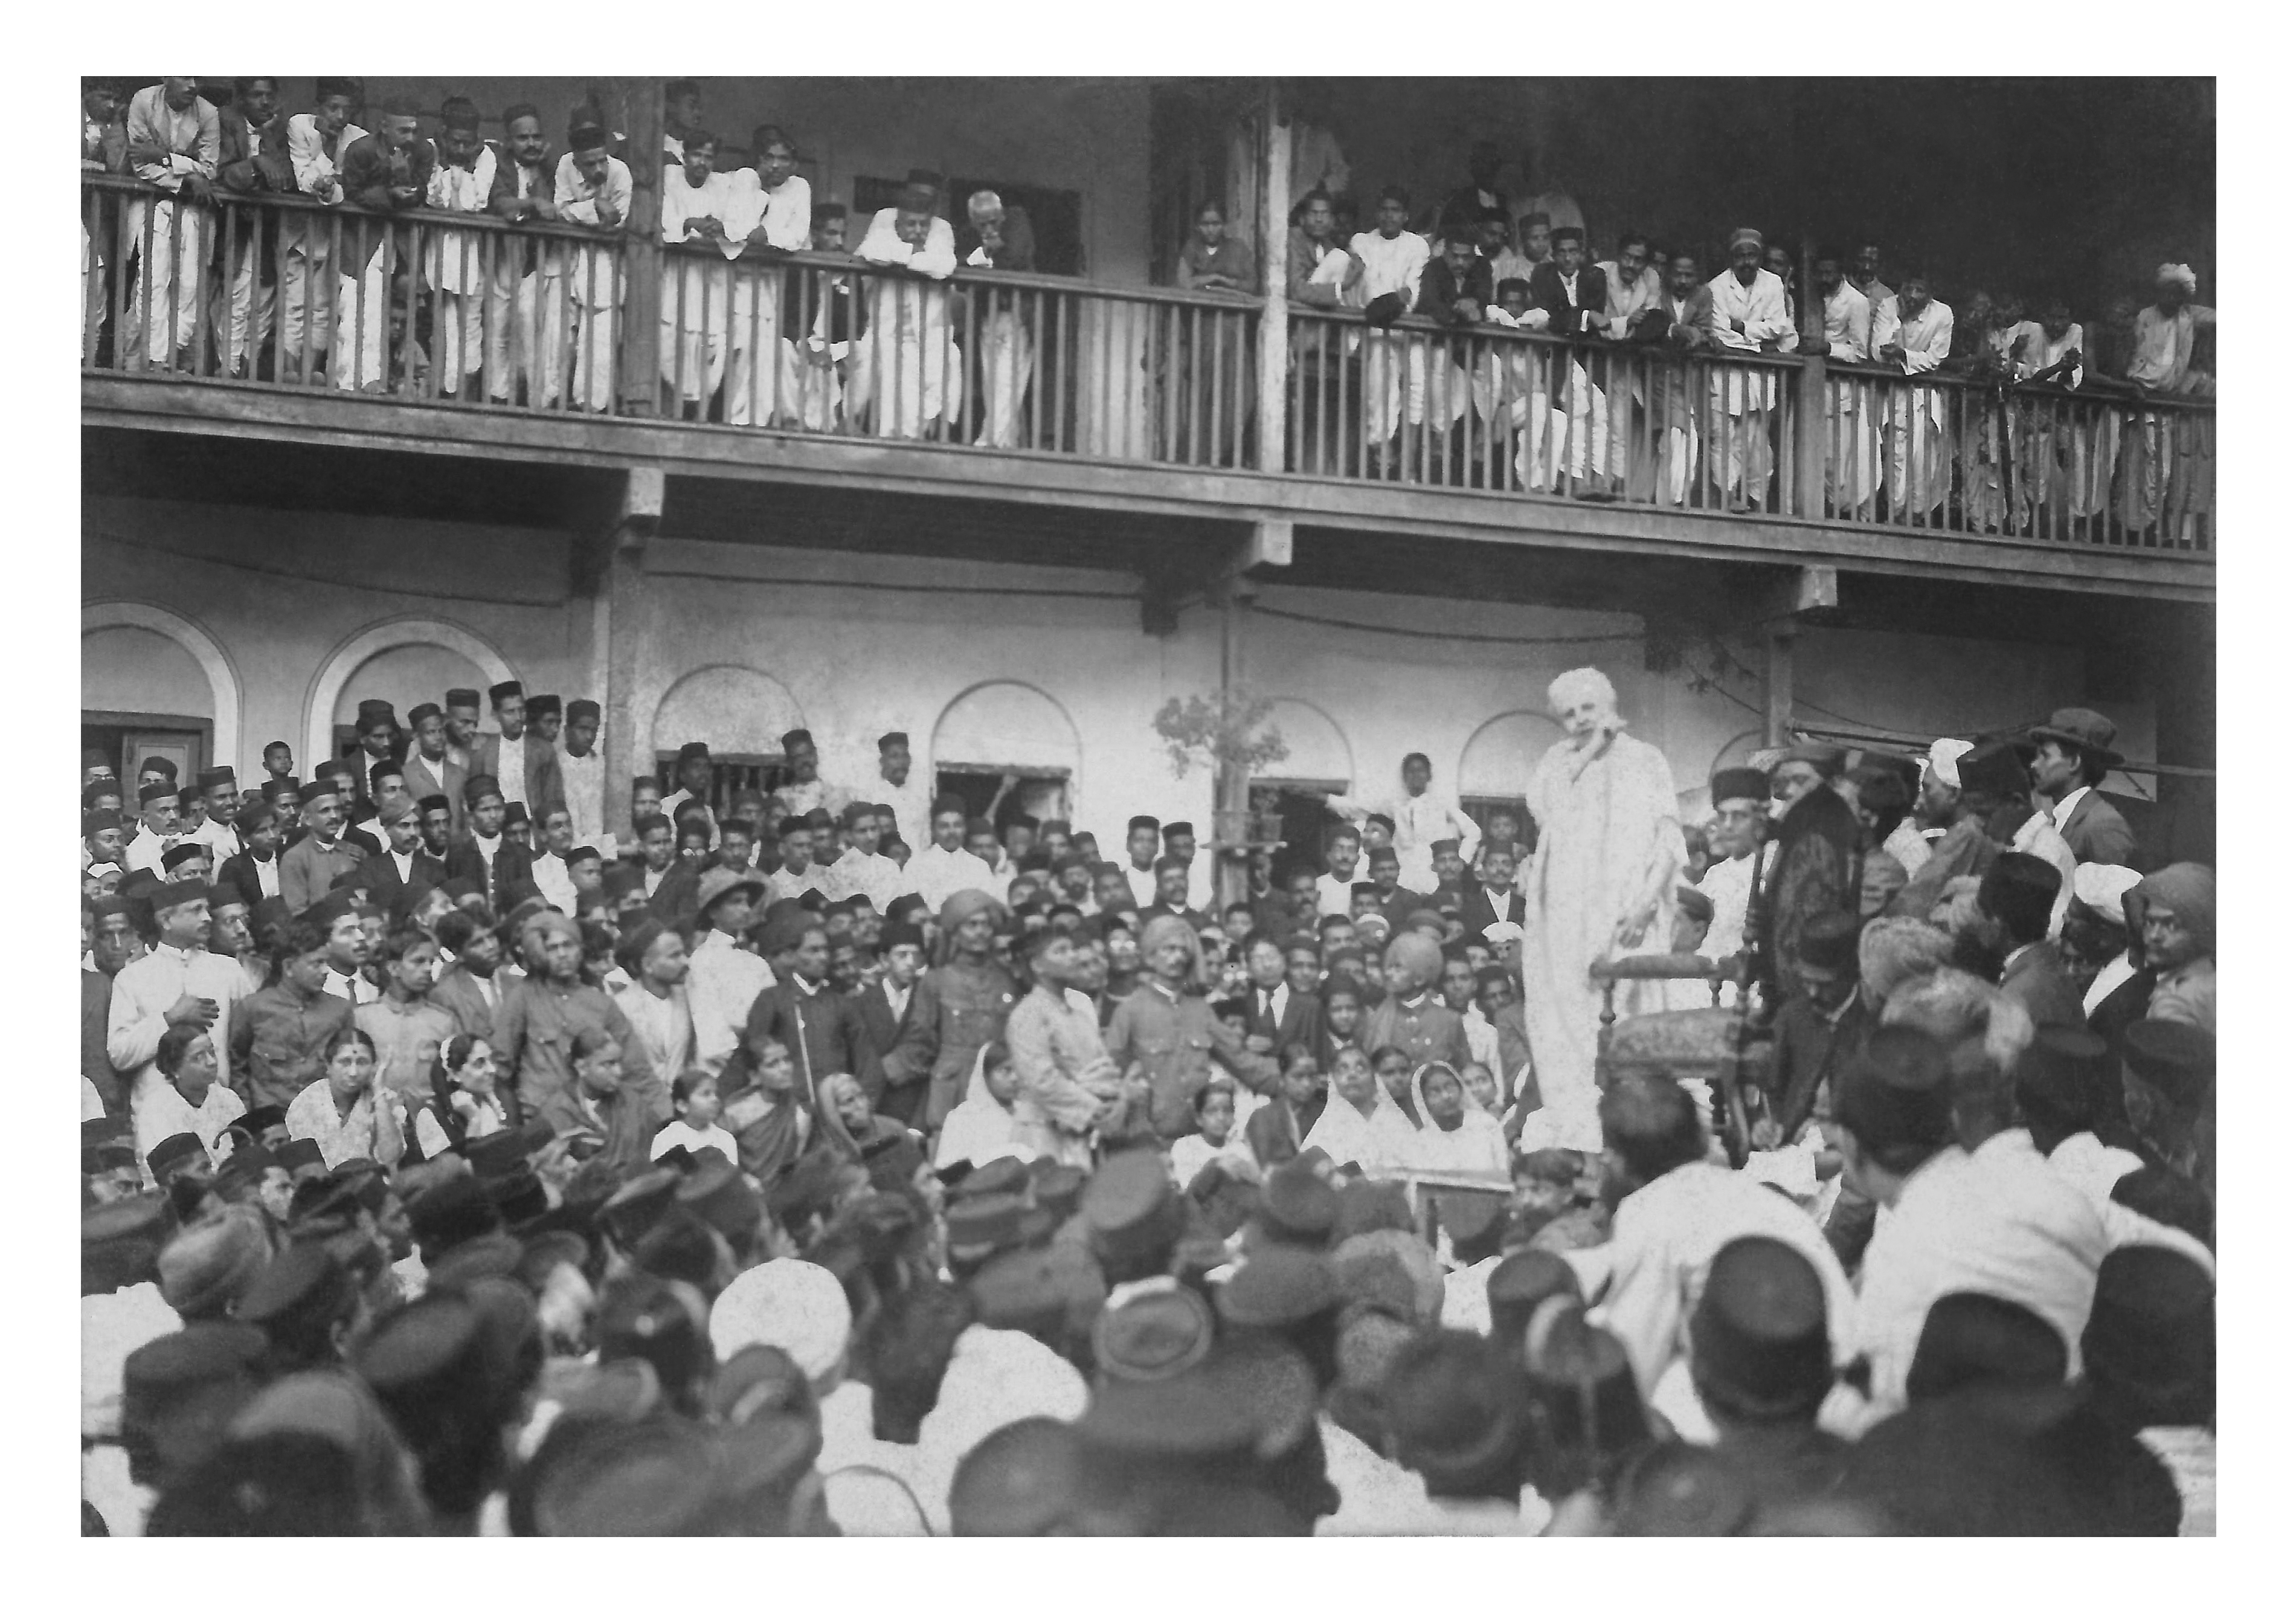 Annie Besant lecturing to a crowd after her release from internment (Courtesy of the Theosophical Society)